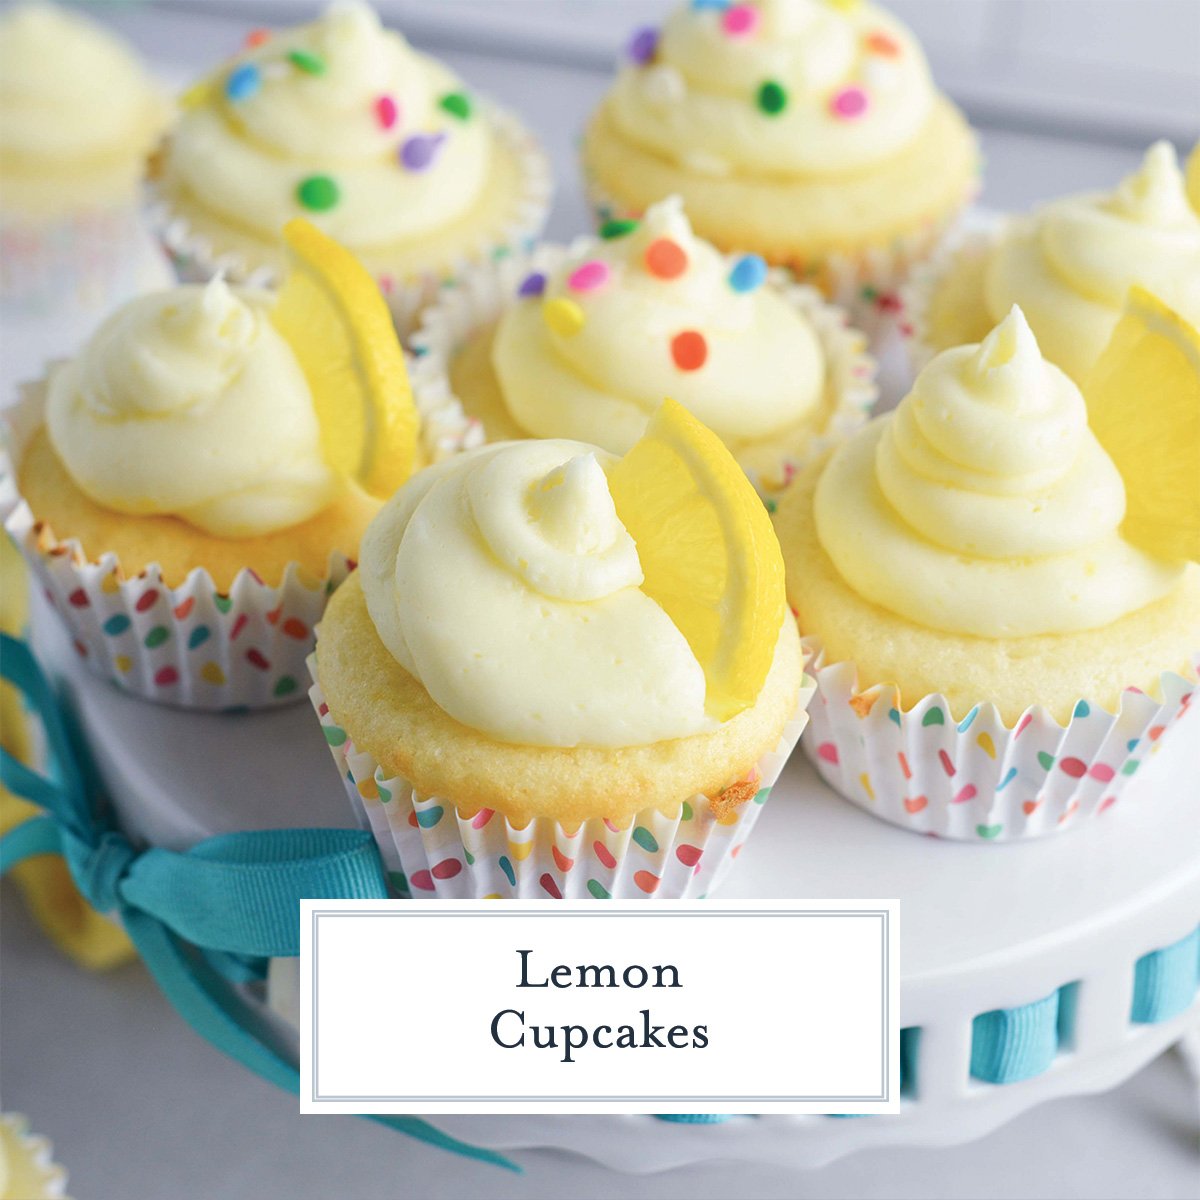 image of six lemon cupcakes on a serving platter with text overlay